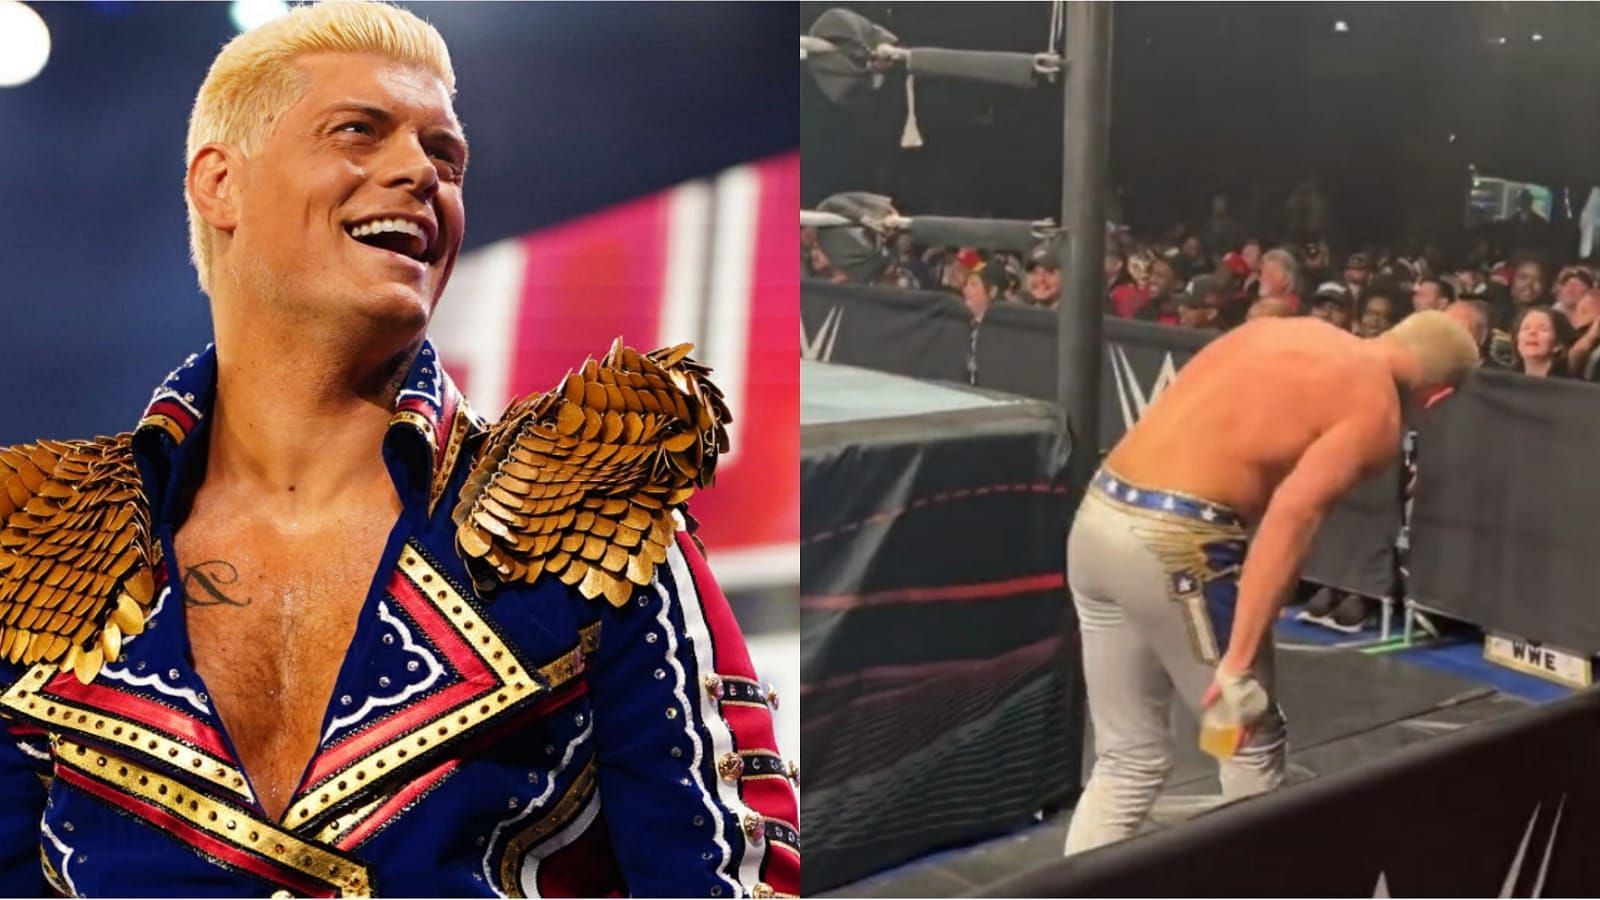 Cody Rhodes returned from injury at WWE Royal Rumble!